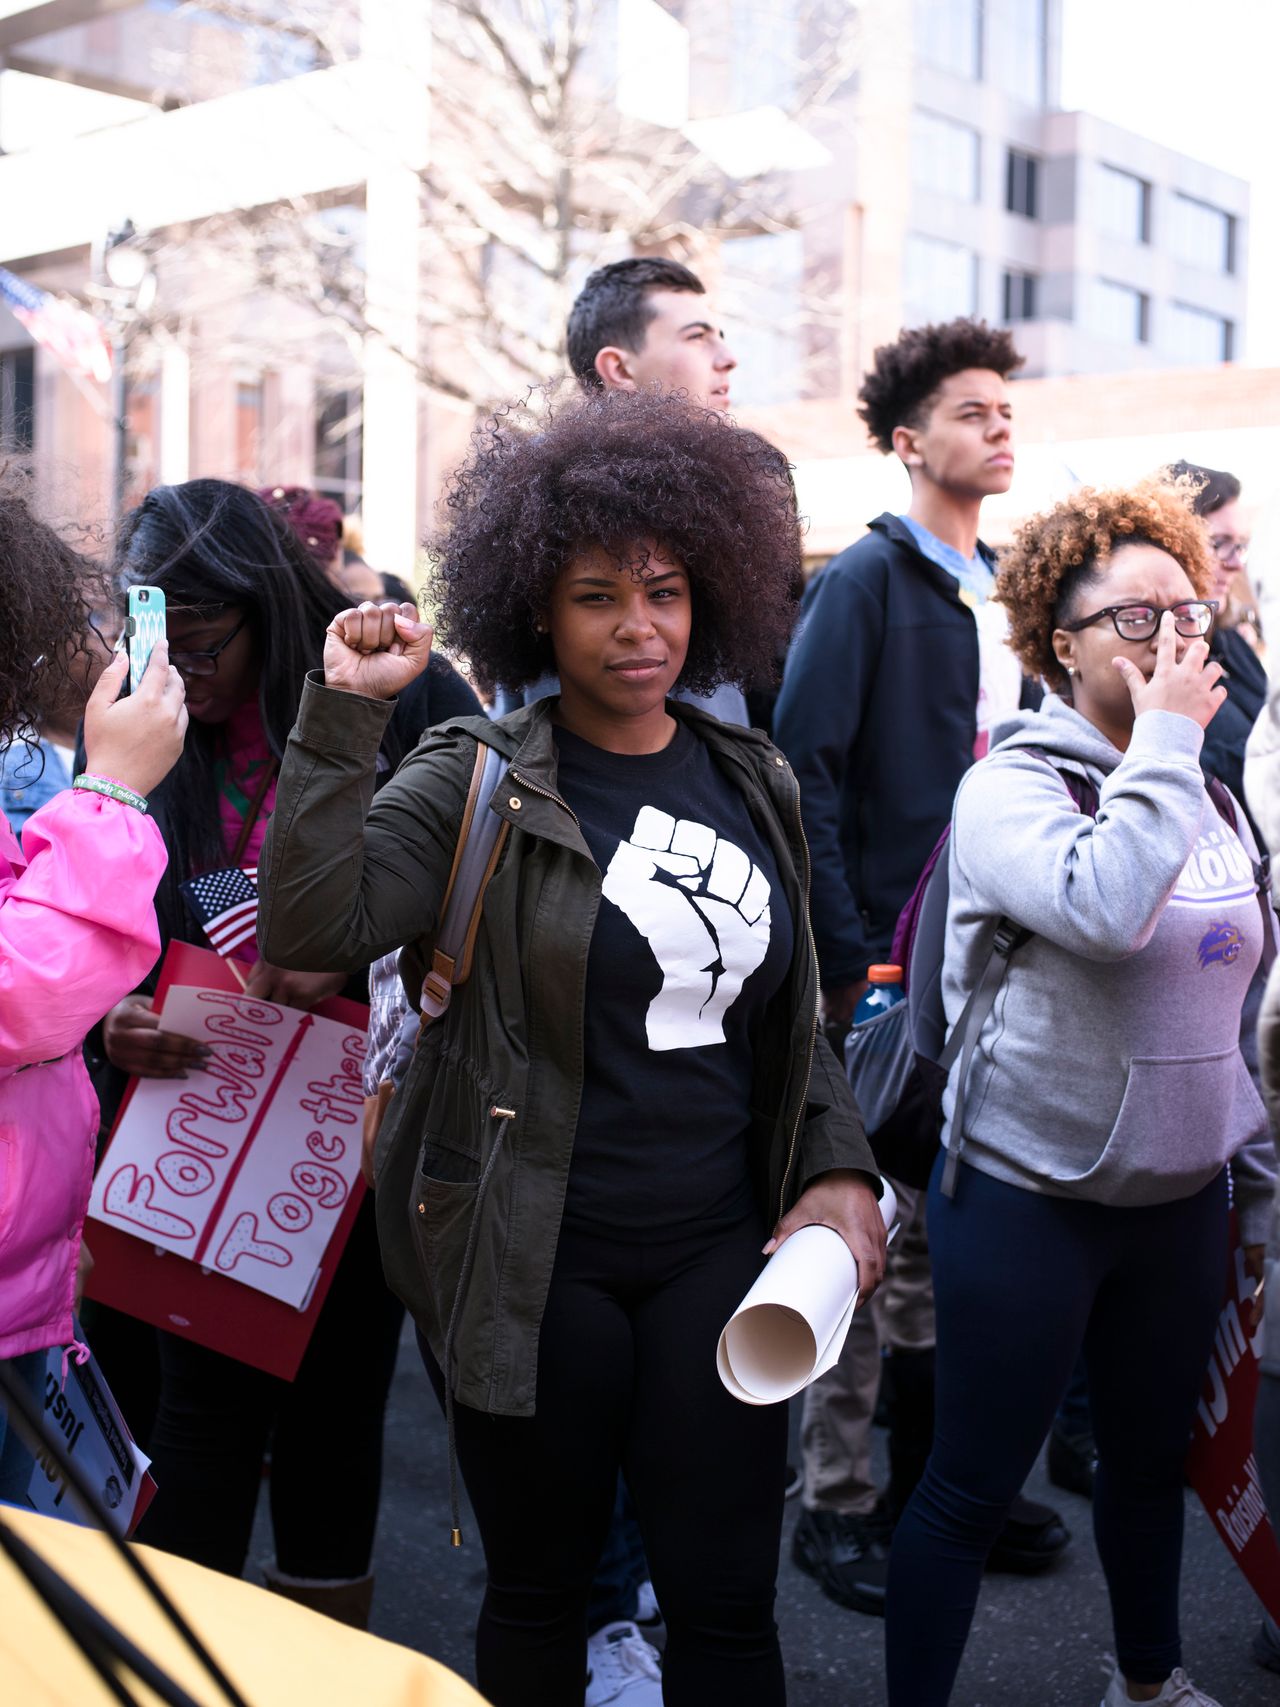 A woman holds up her fist during the Moral March on Feb 11.